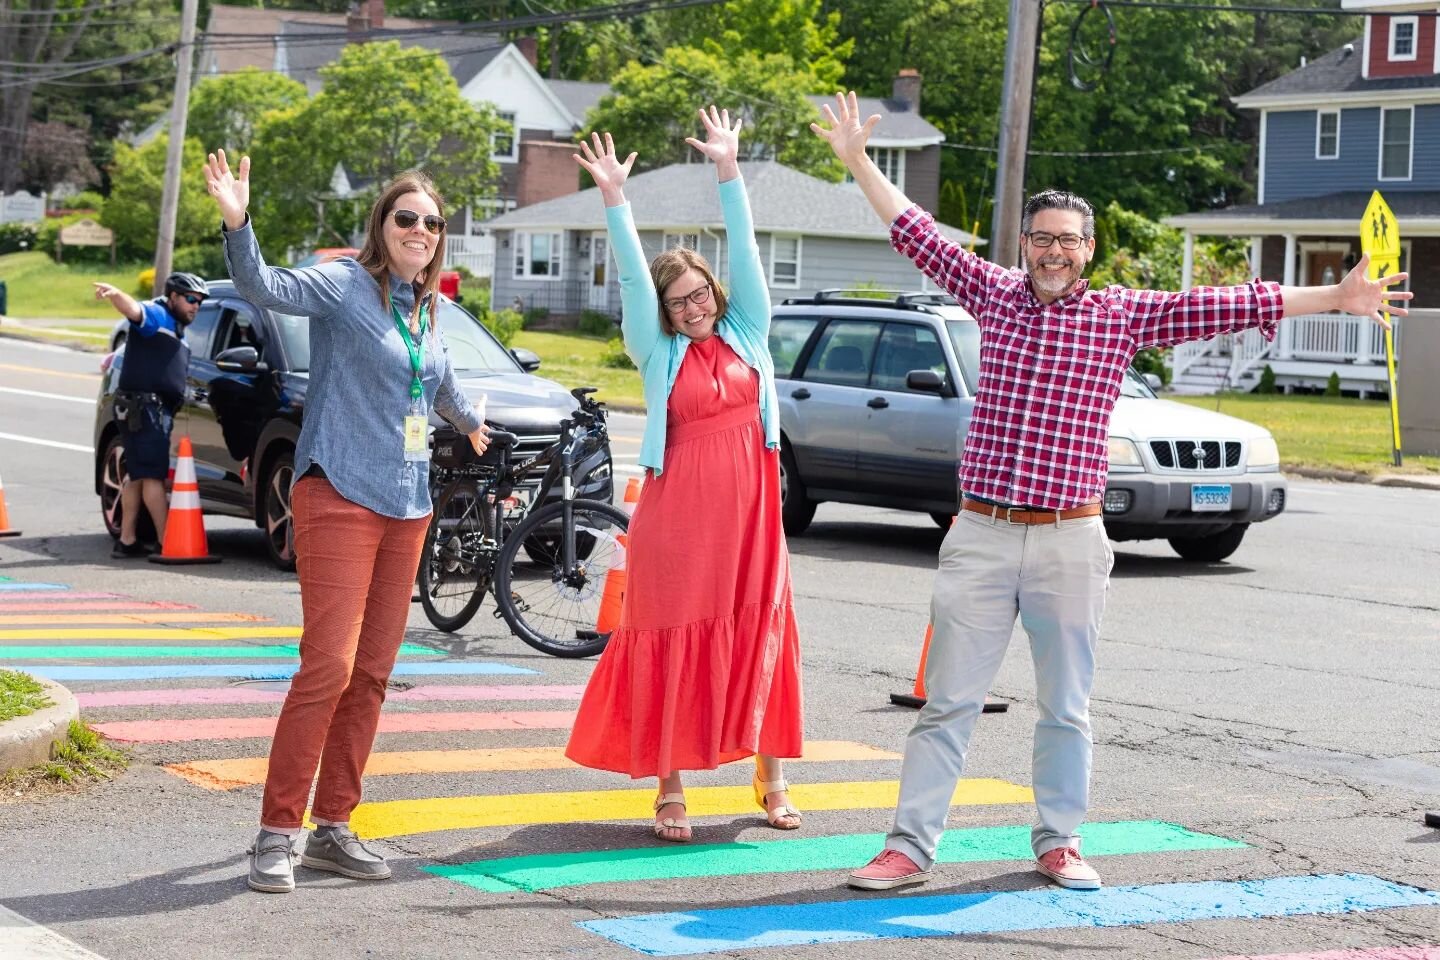 It's official: #HamdenHasPride ! Today, we prepared to kick off #PrideMonth with Hamden&quot;s first #Pride crosswalks. A huge thank you to Guidelines LLC for their generous donation of time, skill and materials to make this happen for #Hamden